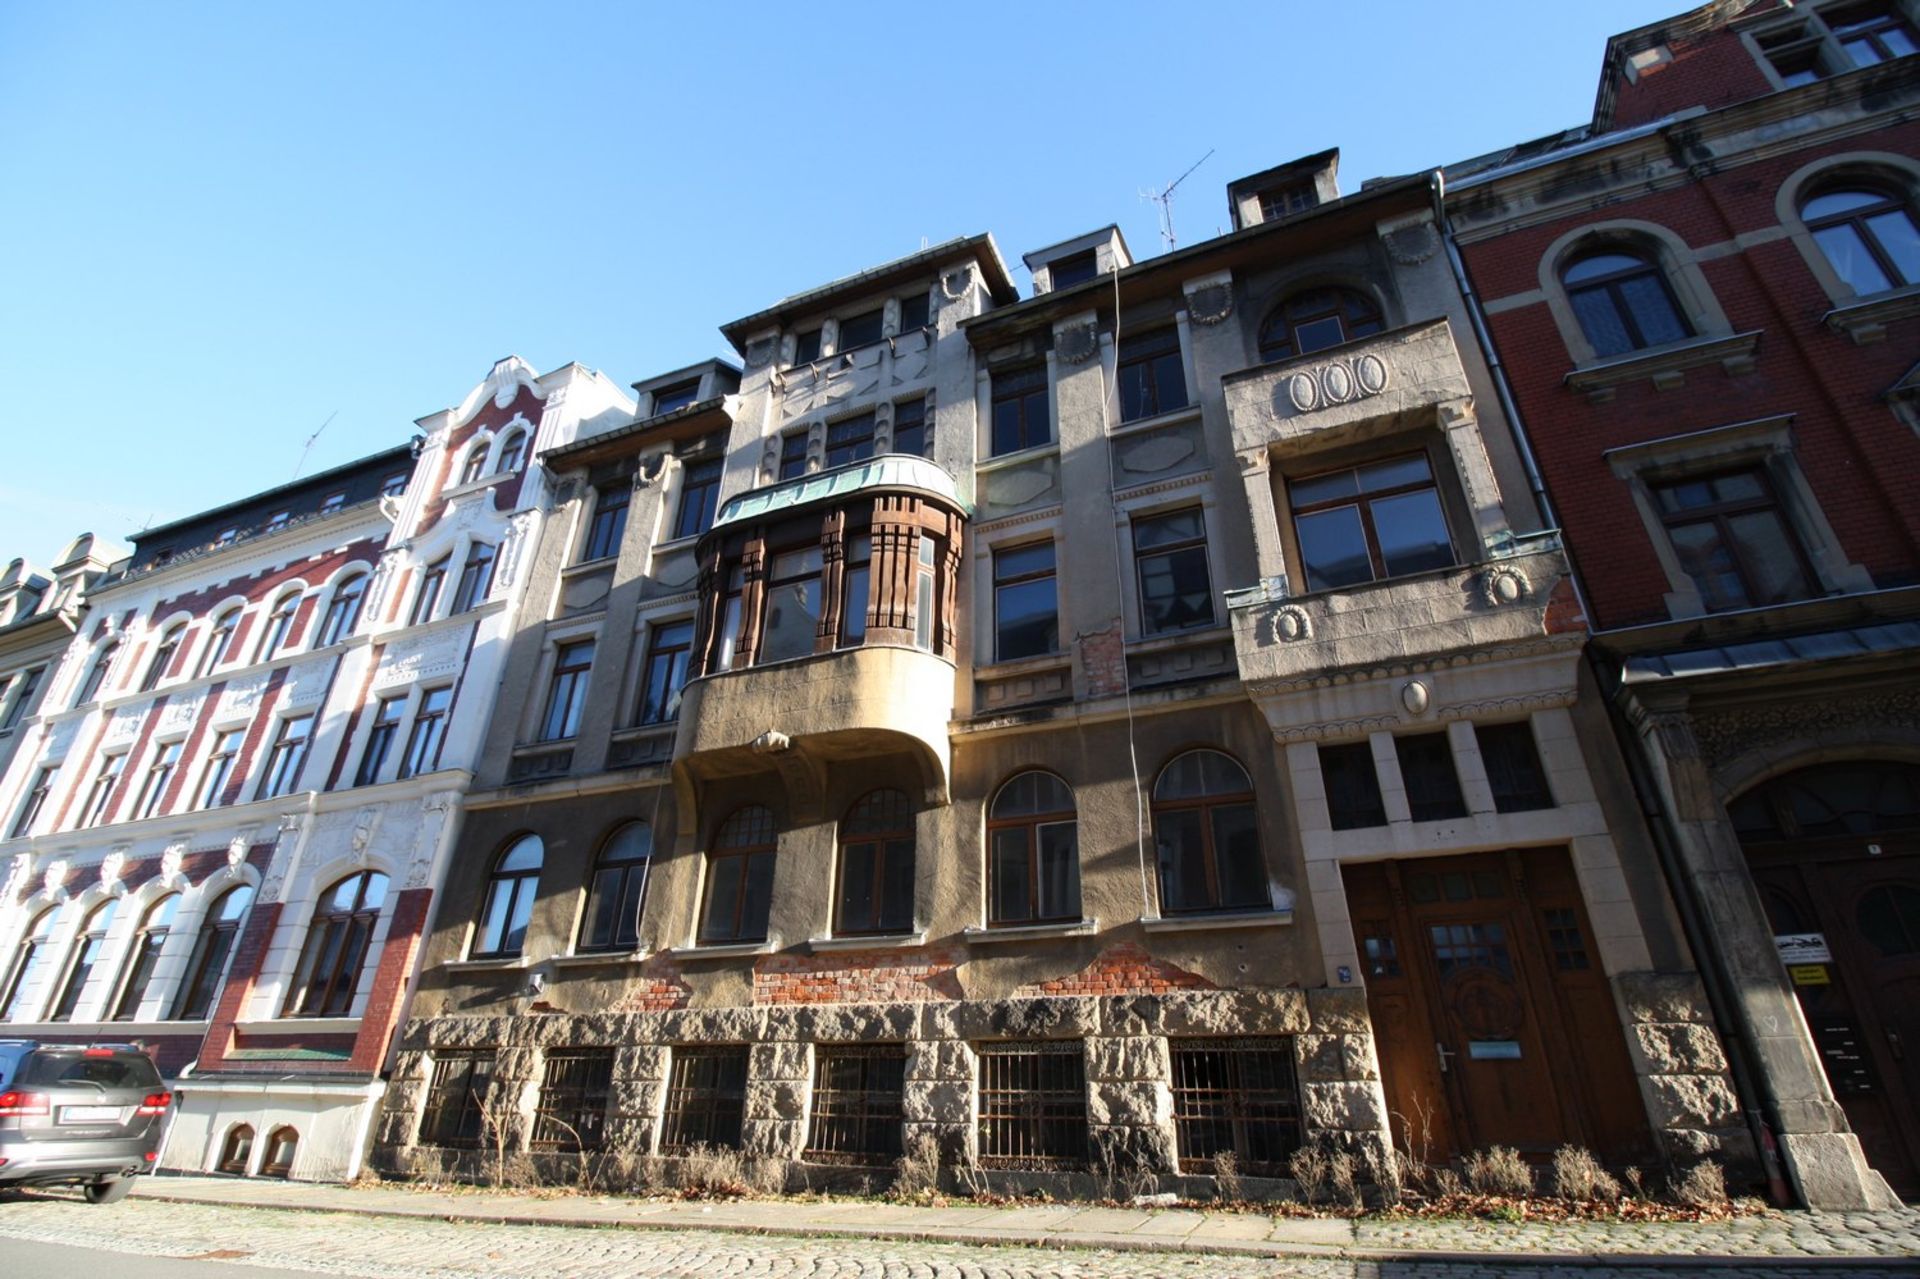 4 STOREY GERMANY APARTMENT BLOCK IN ADDITION TO A FULL BASEMENT + HUGE ATTIC! - Image 63 of 76